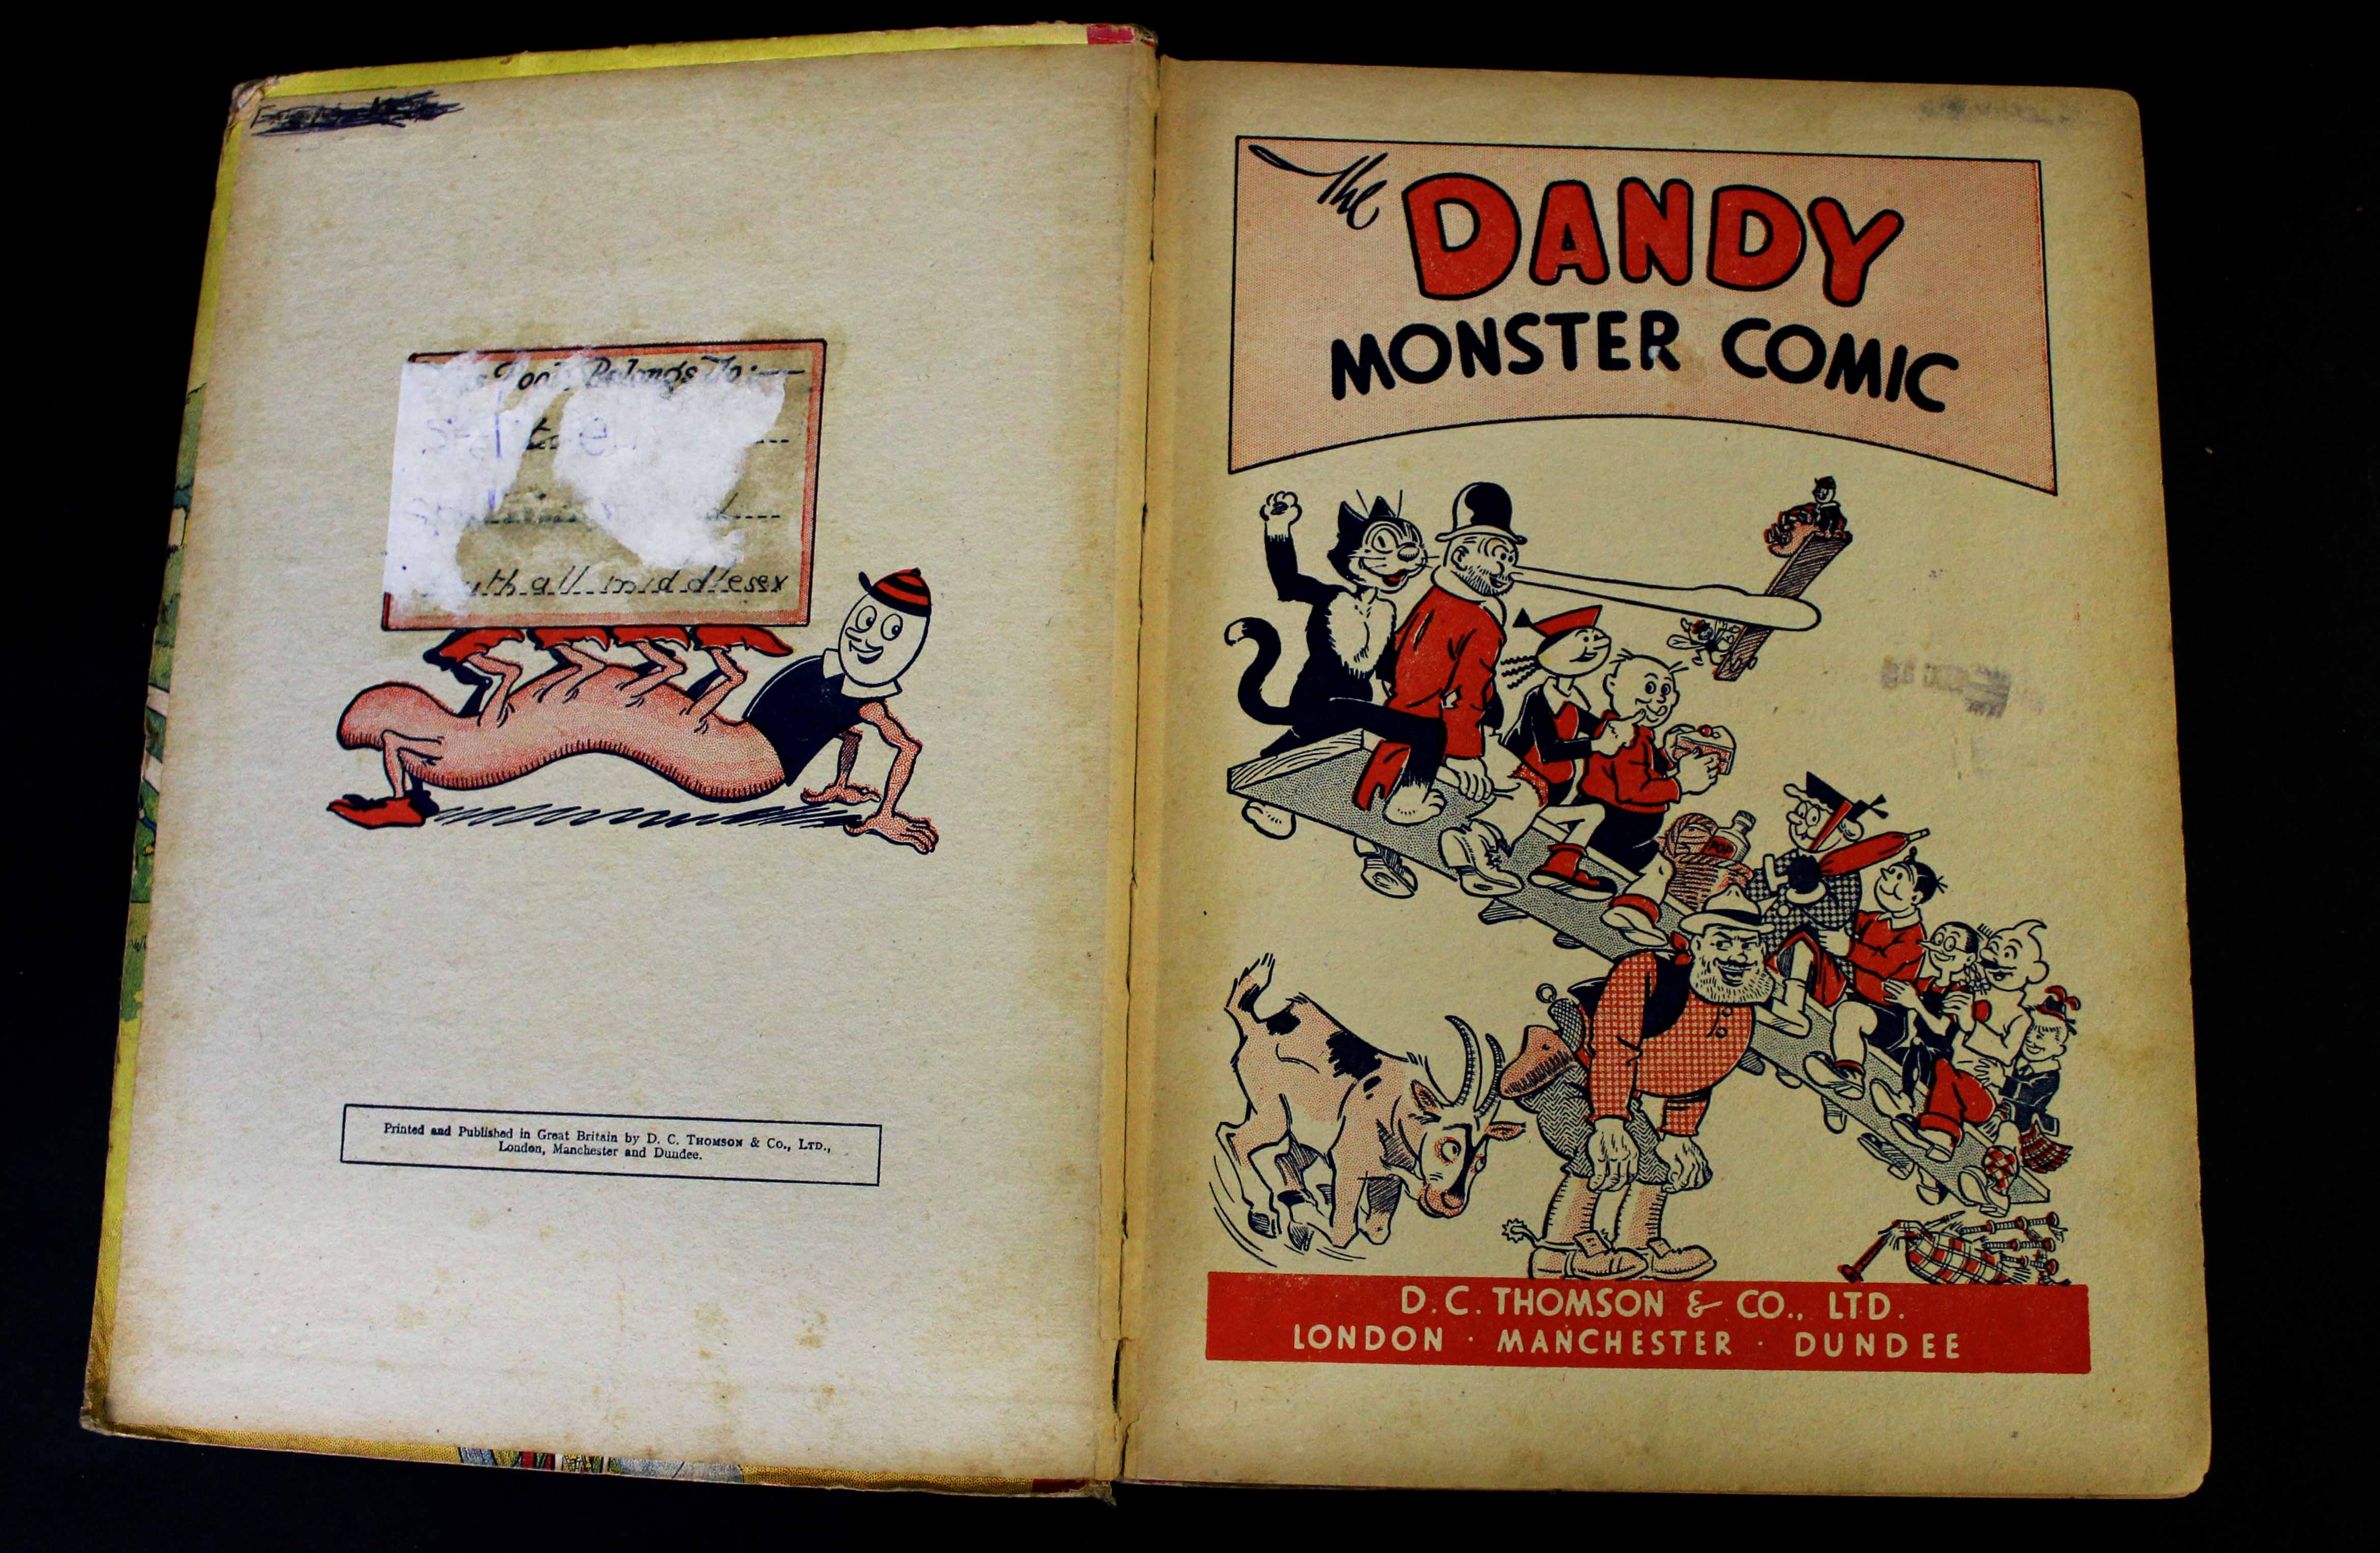 THE DANDY MONSTER COMIC, London, Manchester and Dundee, D C Thomson, 1943 annual, 4to, original - Image 2 of 4